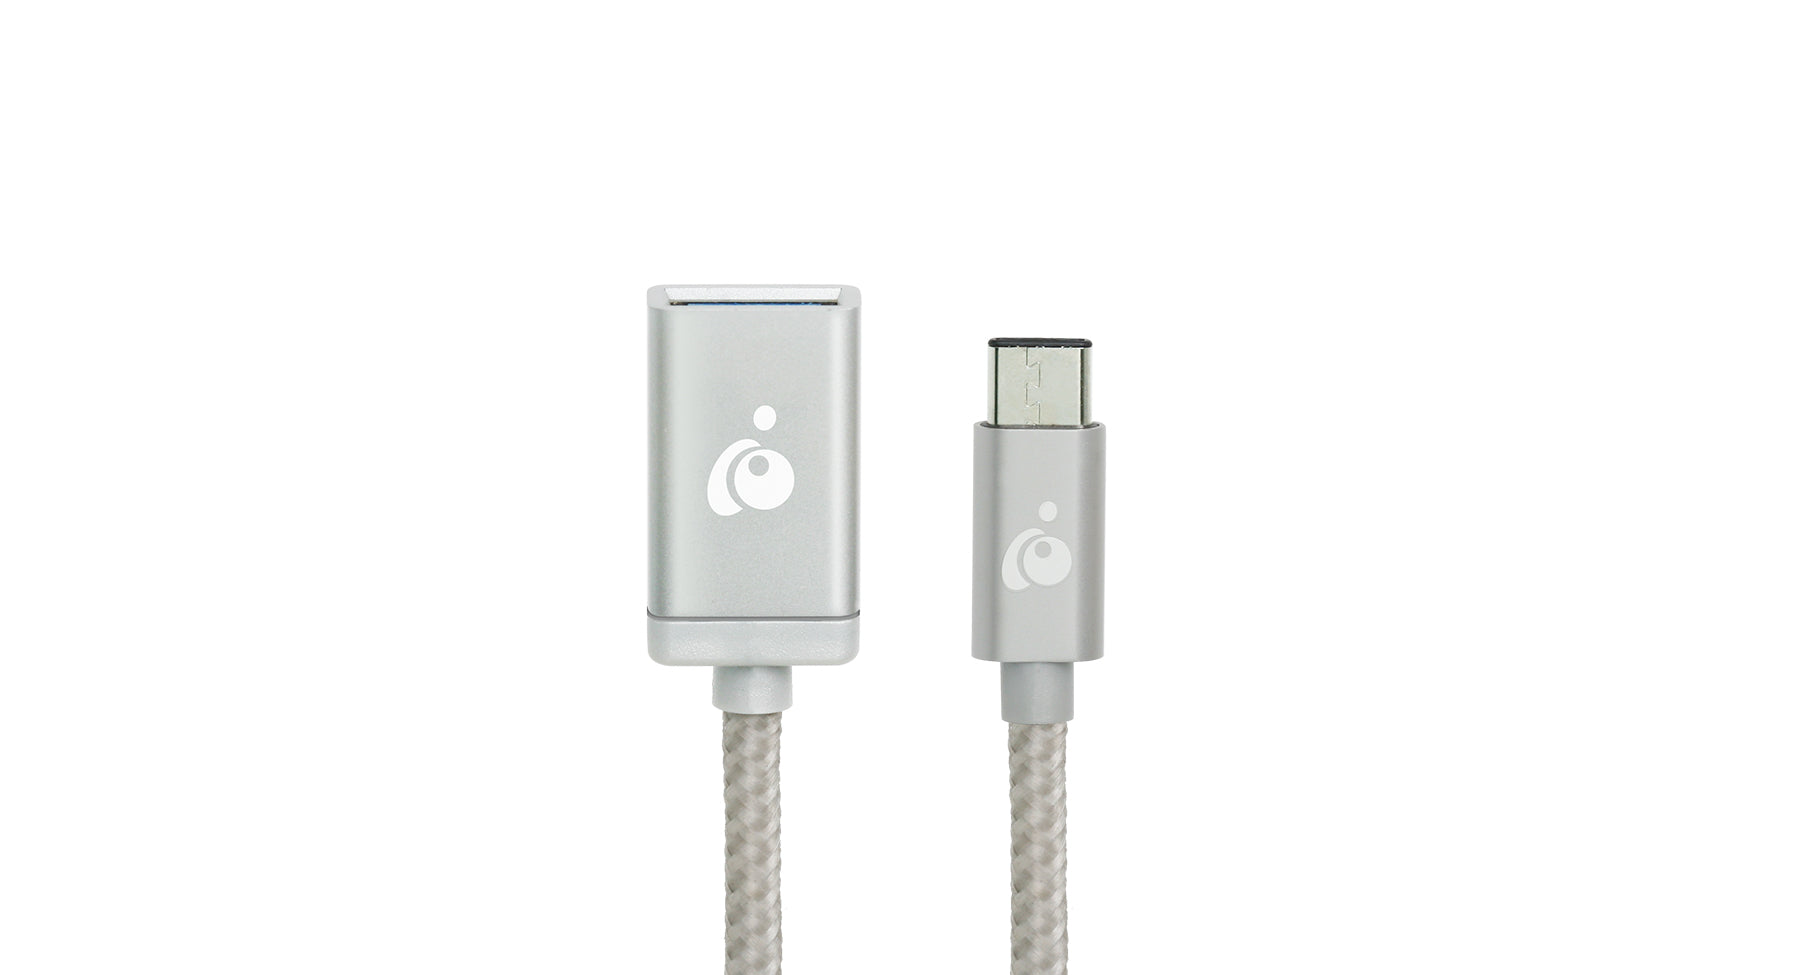 2x4 USB 3.0 Peripheral Sharing Switch with USB-C Adapter